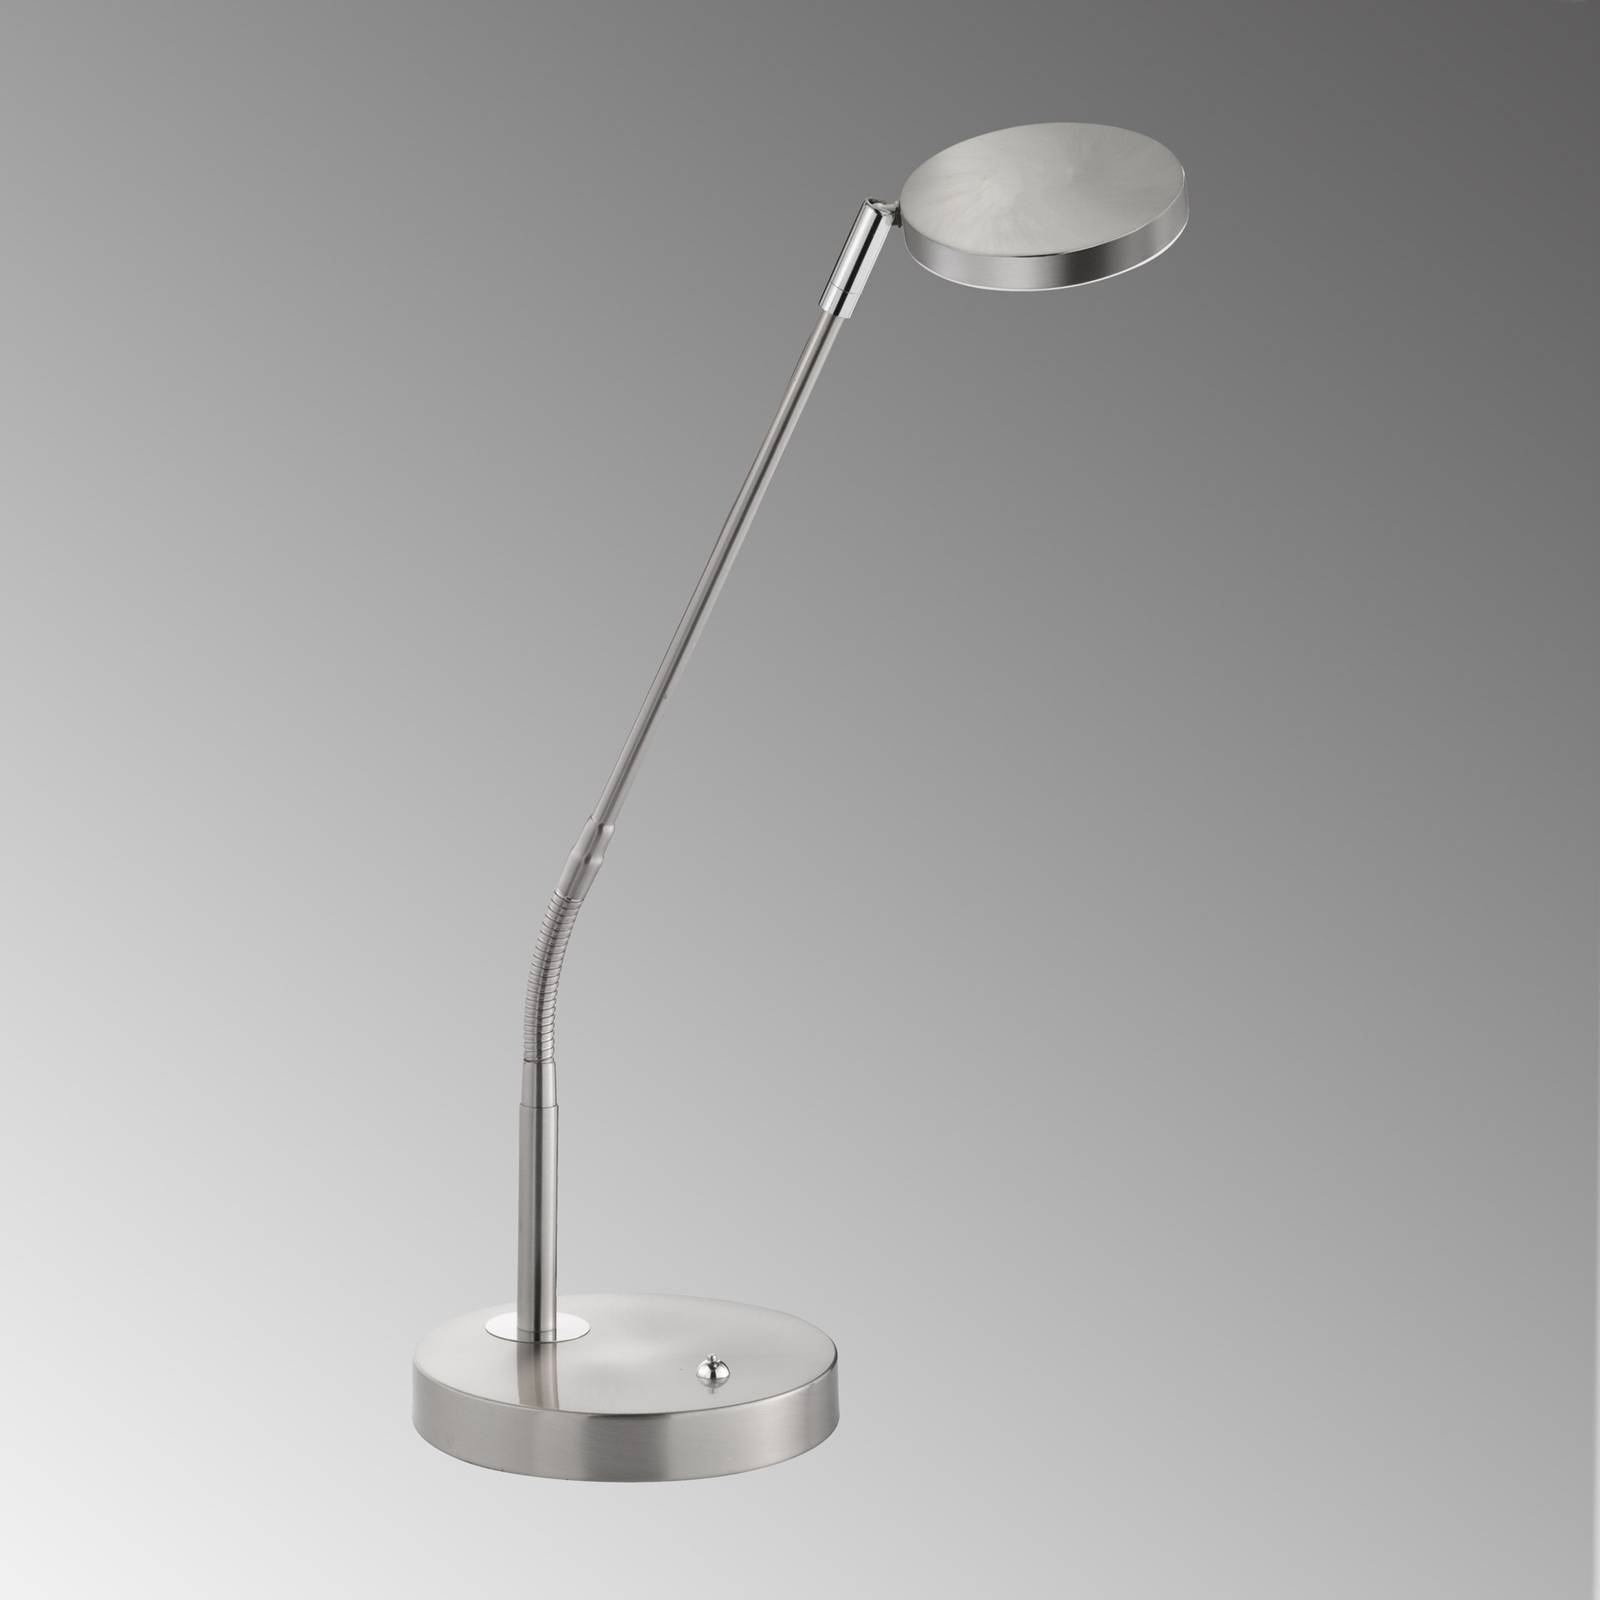 FH Lighting Lampe à poser LED Lunia, dimmable, nickel mat